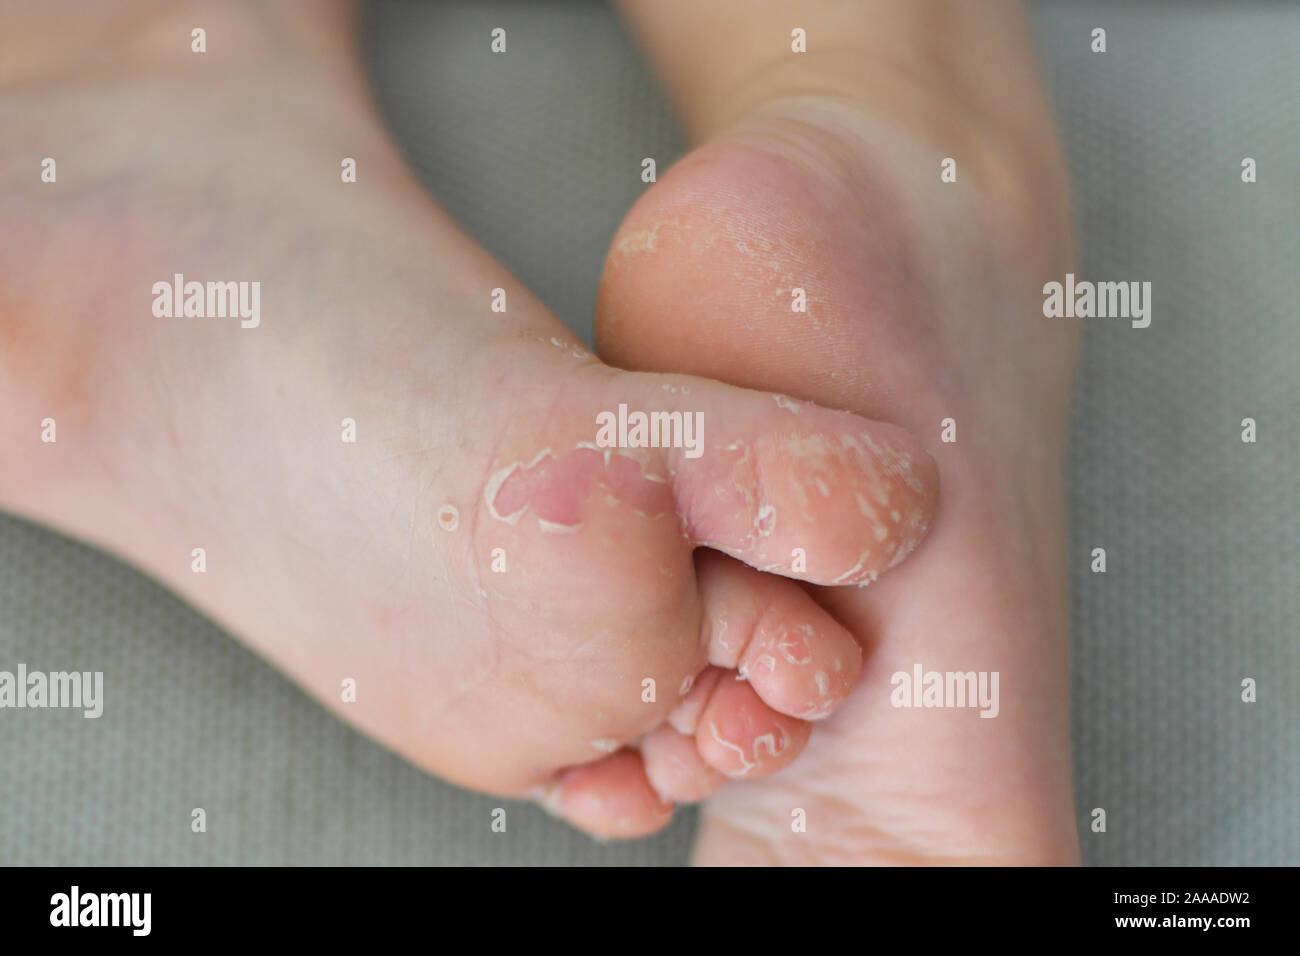 Enterovirus Foot Hand Mouth Skin Peeled Off On The Body Of A Child Cocksackie Virus Stock Photo Alamy